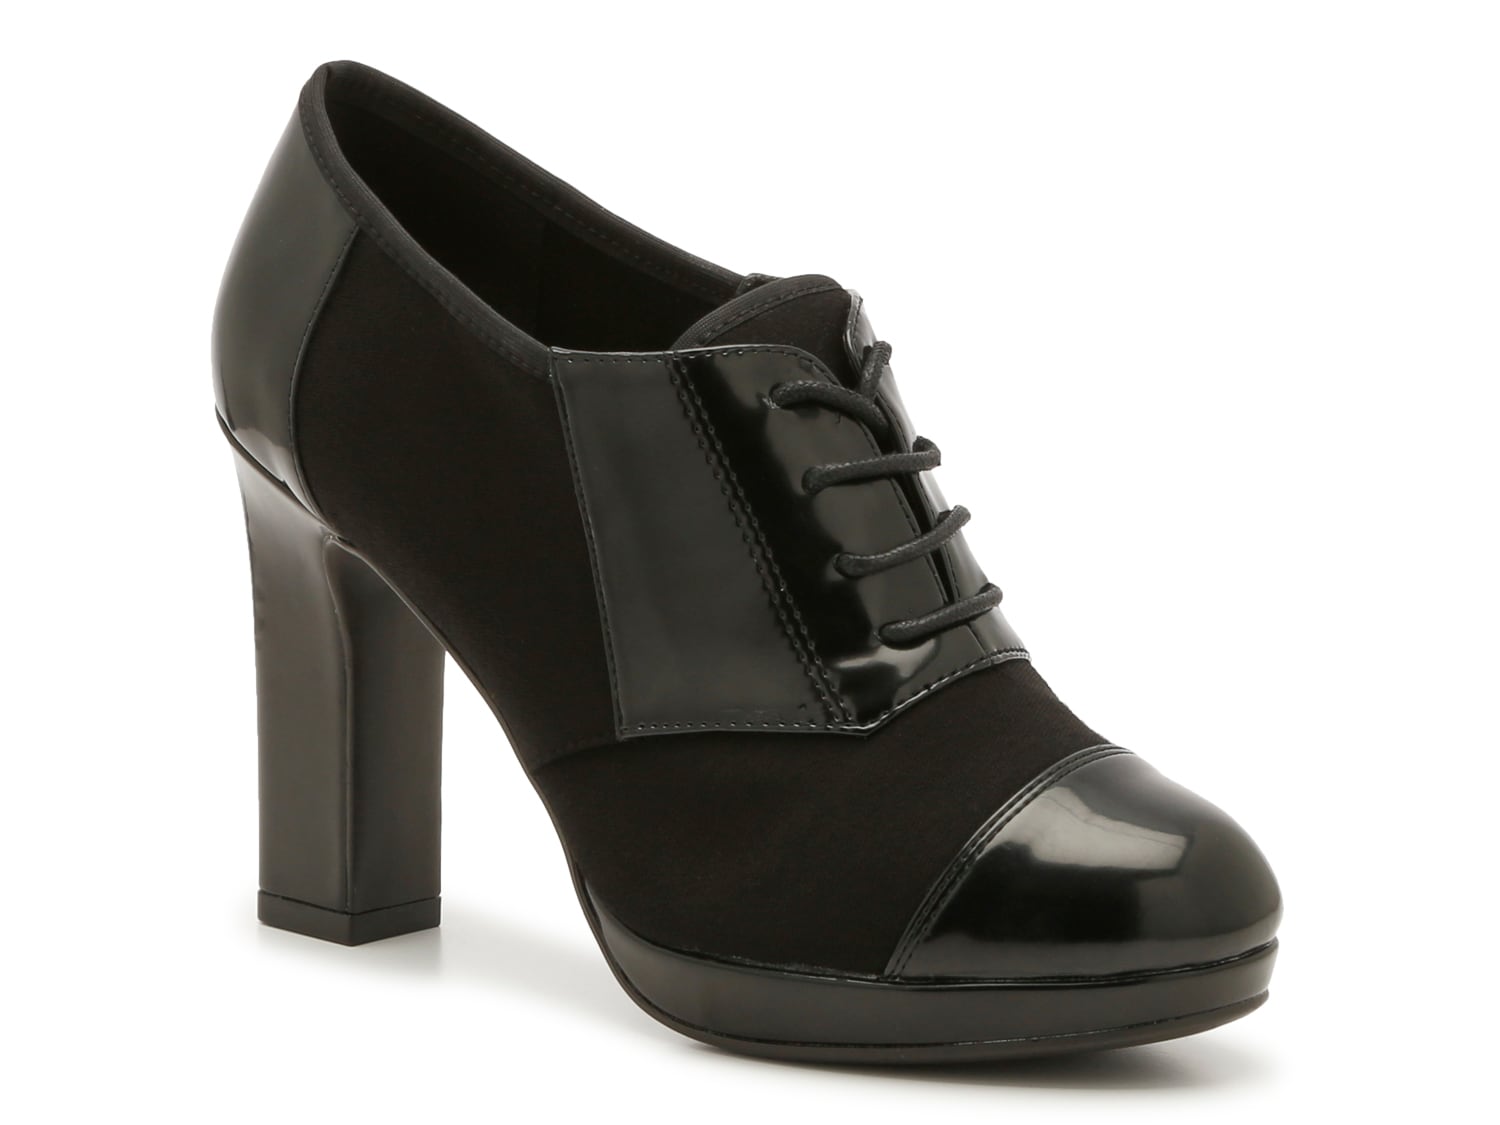 Impo Omarion Pump - Free Shipping | DSW